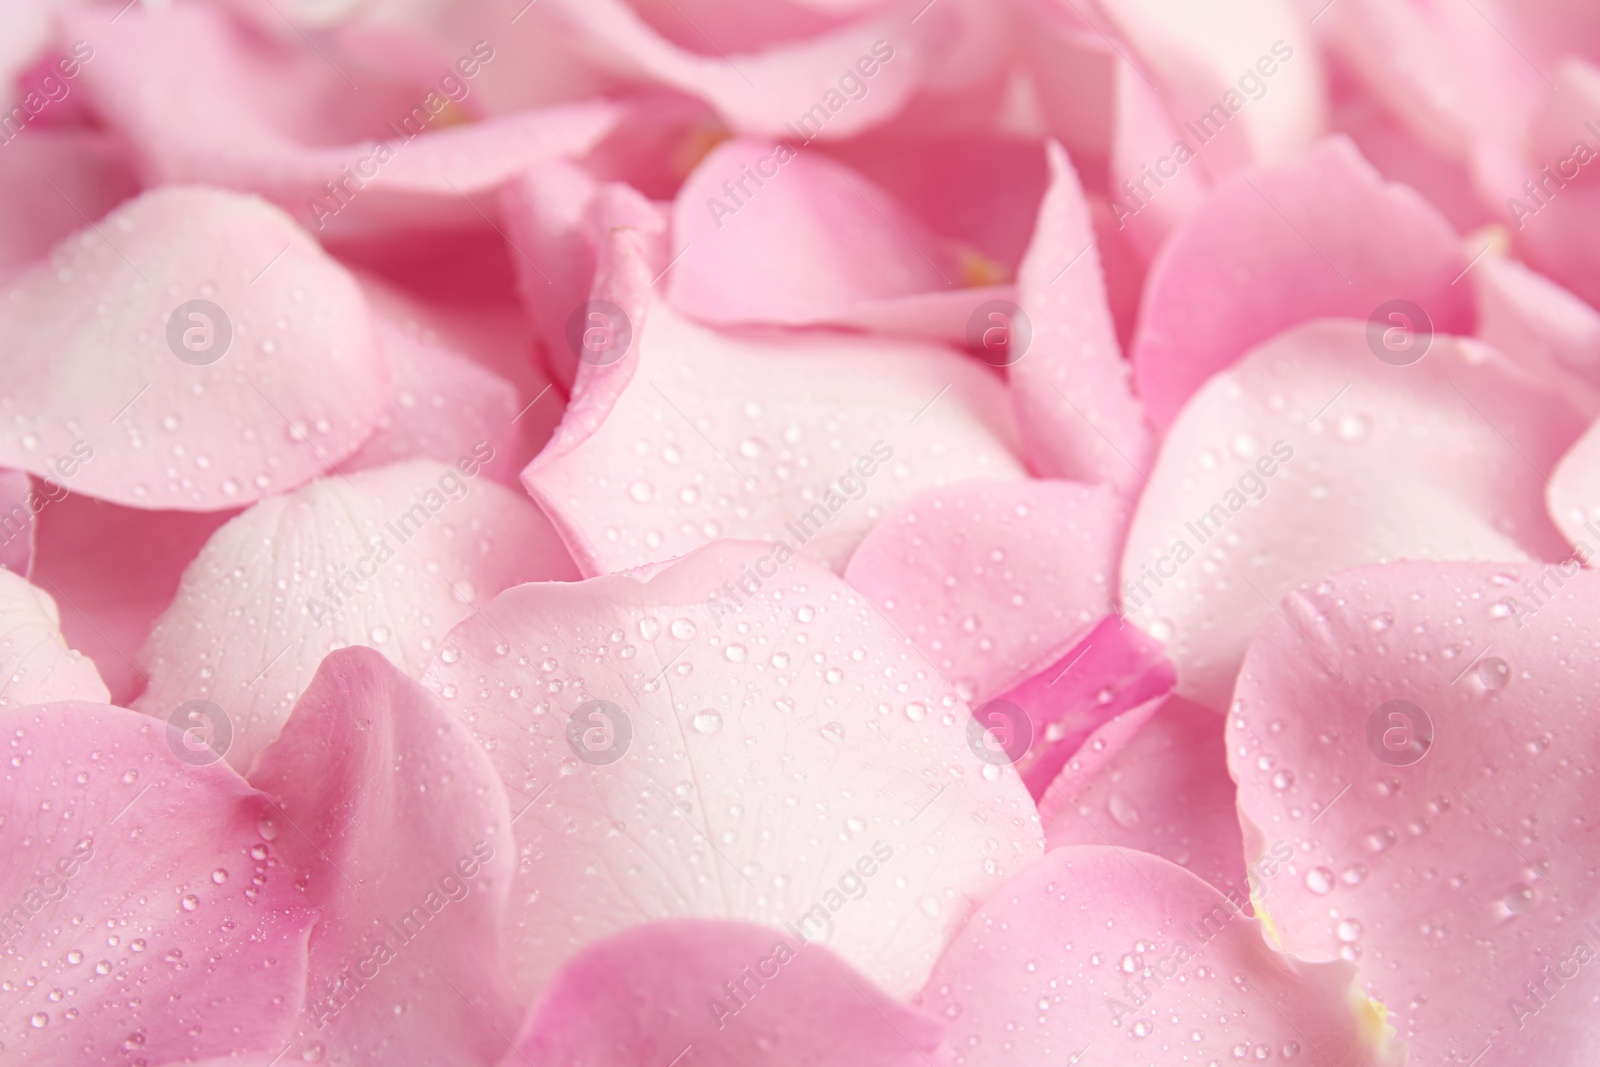 Photo of Pile of fresh pink rose petals with water drops as background, closeup